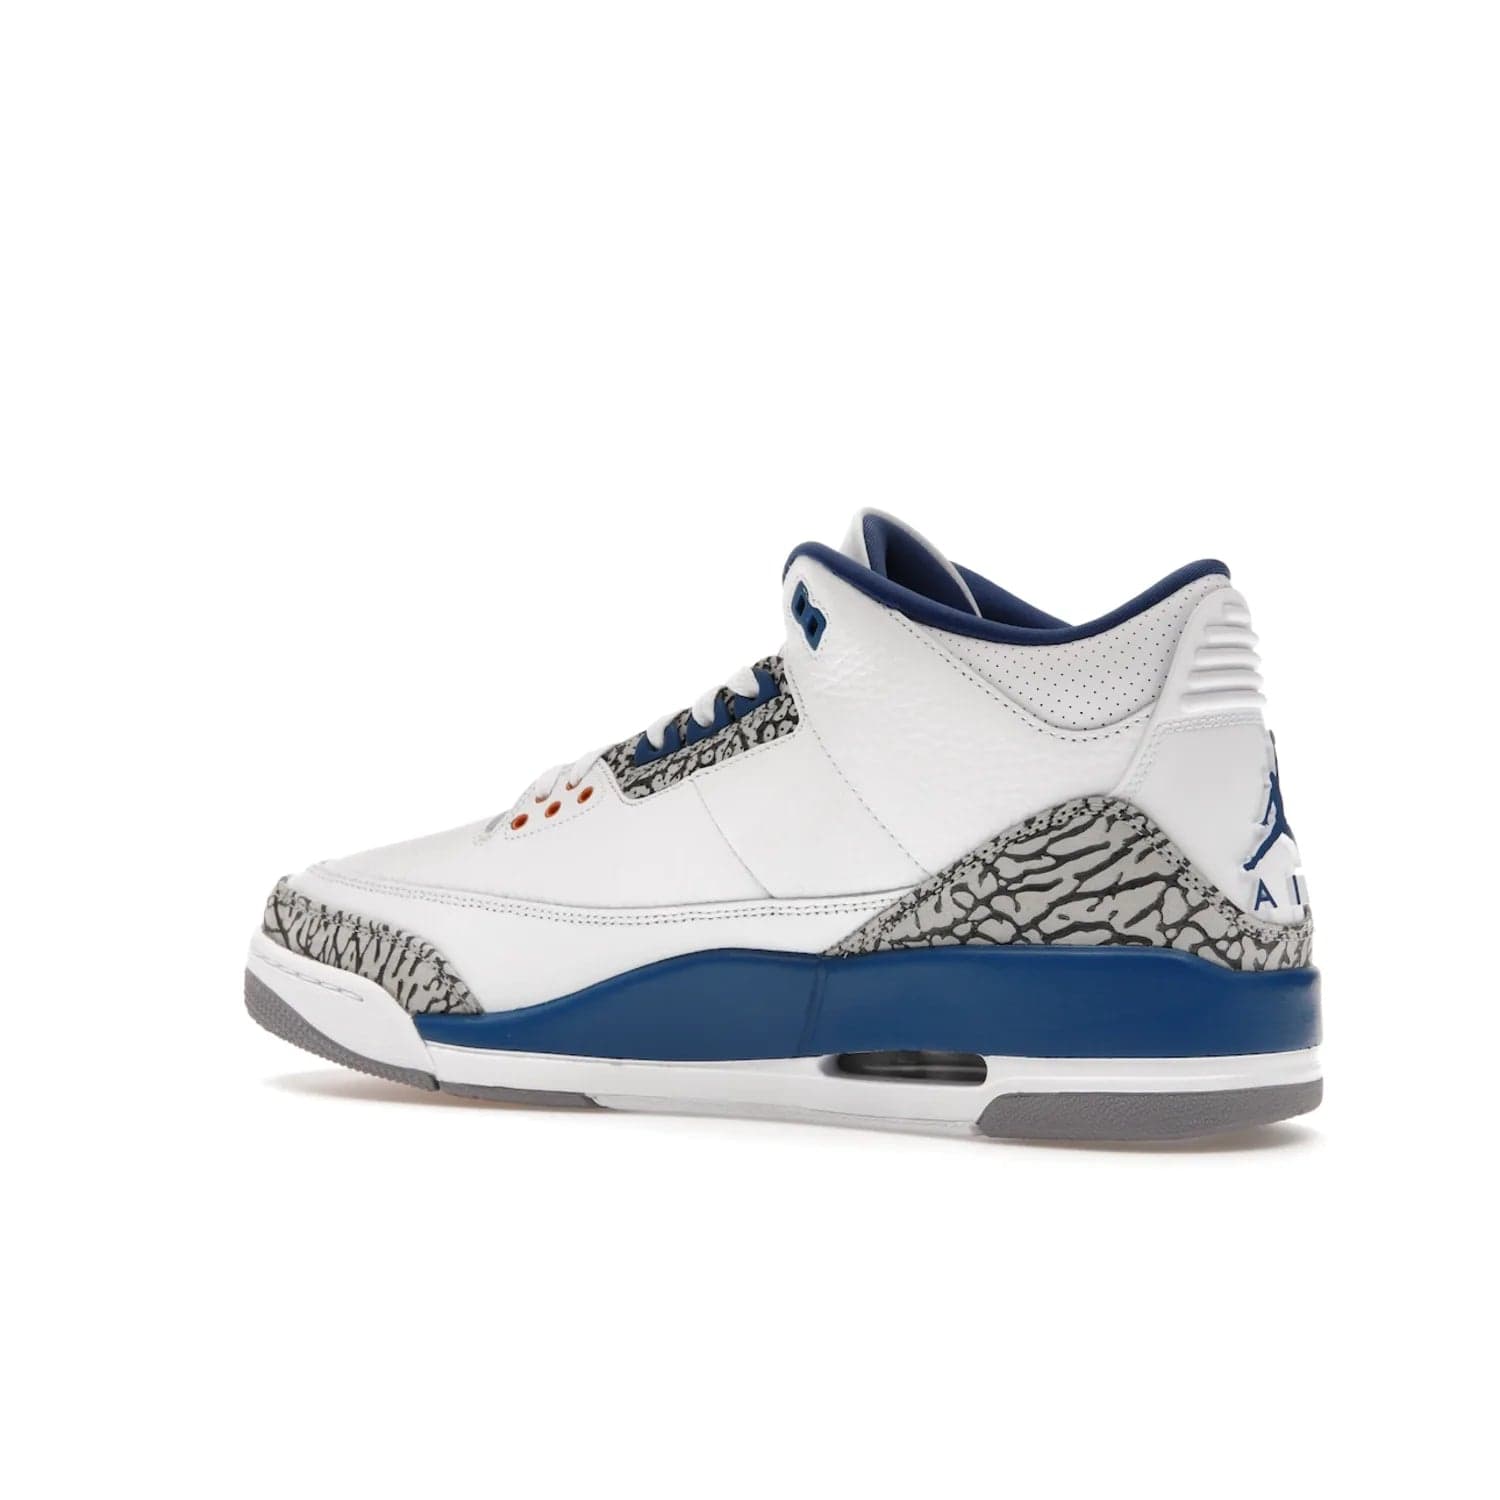 Jordan 3 Retro Wizards - Image 22 - Only at www.BallersClubKickz.com - ##
Special tribute sneaker from Jordan Brand to Michael Jordan's time with the Washington Wizards. Iconic white upper, orange Jumpman logo, blue accents, metallic copper details, and cement grey outsole. Buy the Air Jordan 3 Retro Wizards April 29, 2023.